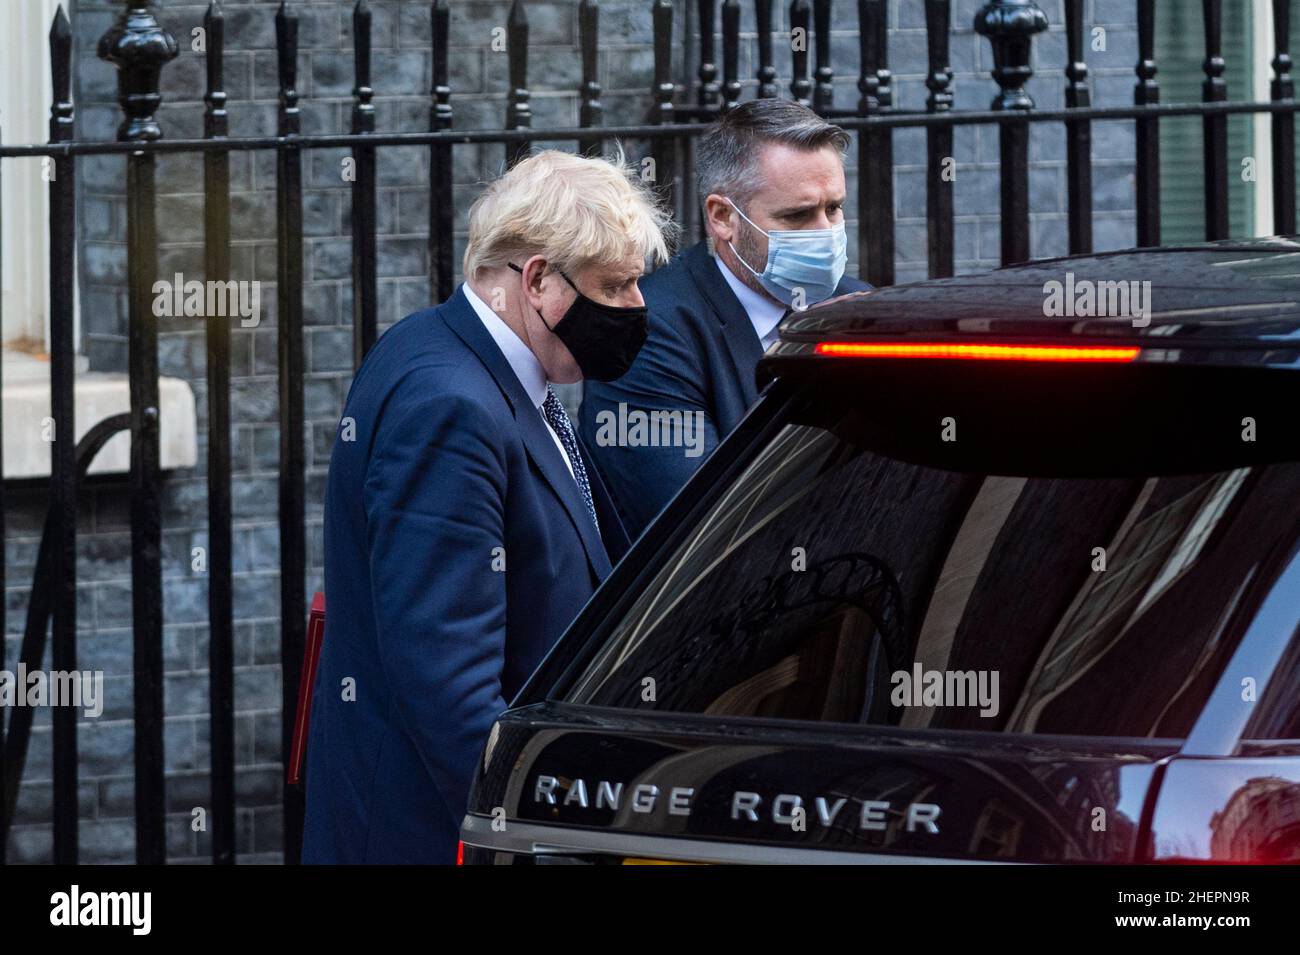 London, UK.  12 January 2022.  Boris Johnson, Prime Minister, leaves Number 10 Downing Street for Prime Minister’s Questions (PMQs) at the House of Commons.  The Prime Minister is under pressure from MPs to respond to questions relating to a party on 20 May 2020 in the gardens of 10 Downing Street, at a time when UK lockdown restrictions banned social gatherings.   Credit: Stephen Chung / Alamy Live News Stock Photo